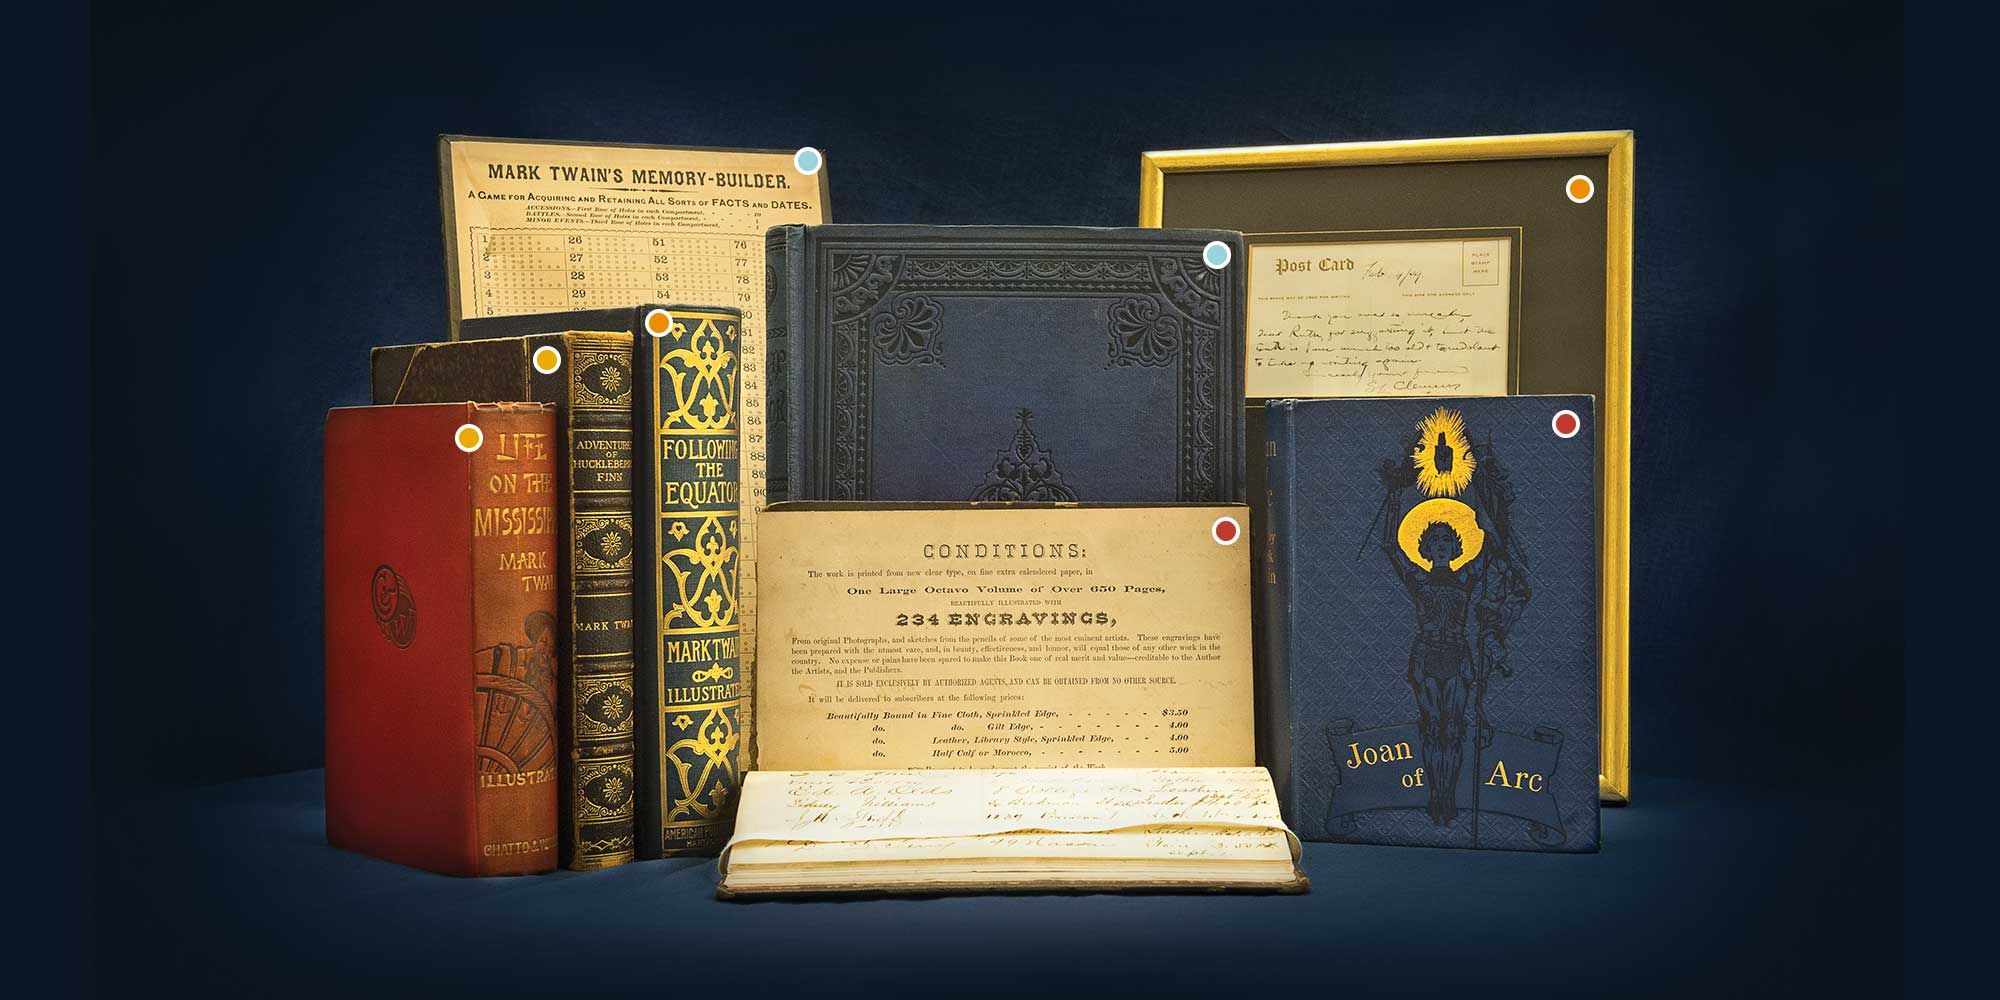 Books and items from the Mark Twain Collection at WVU Libraries.